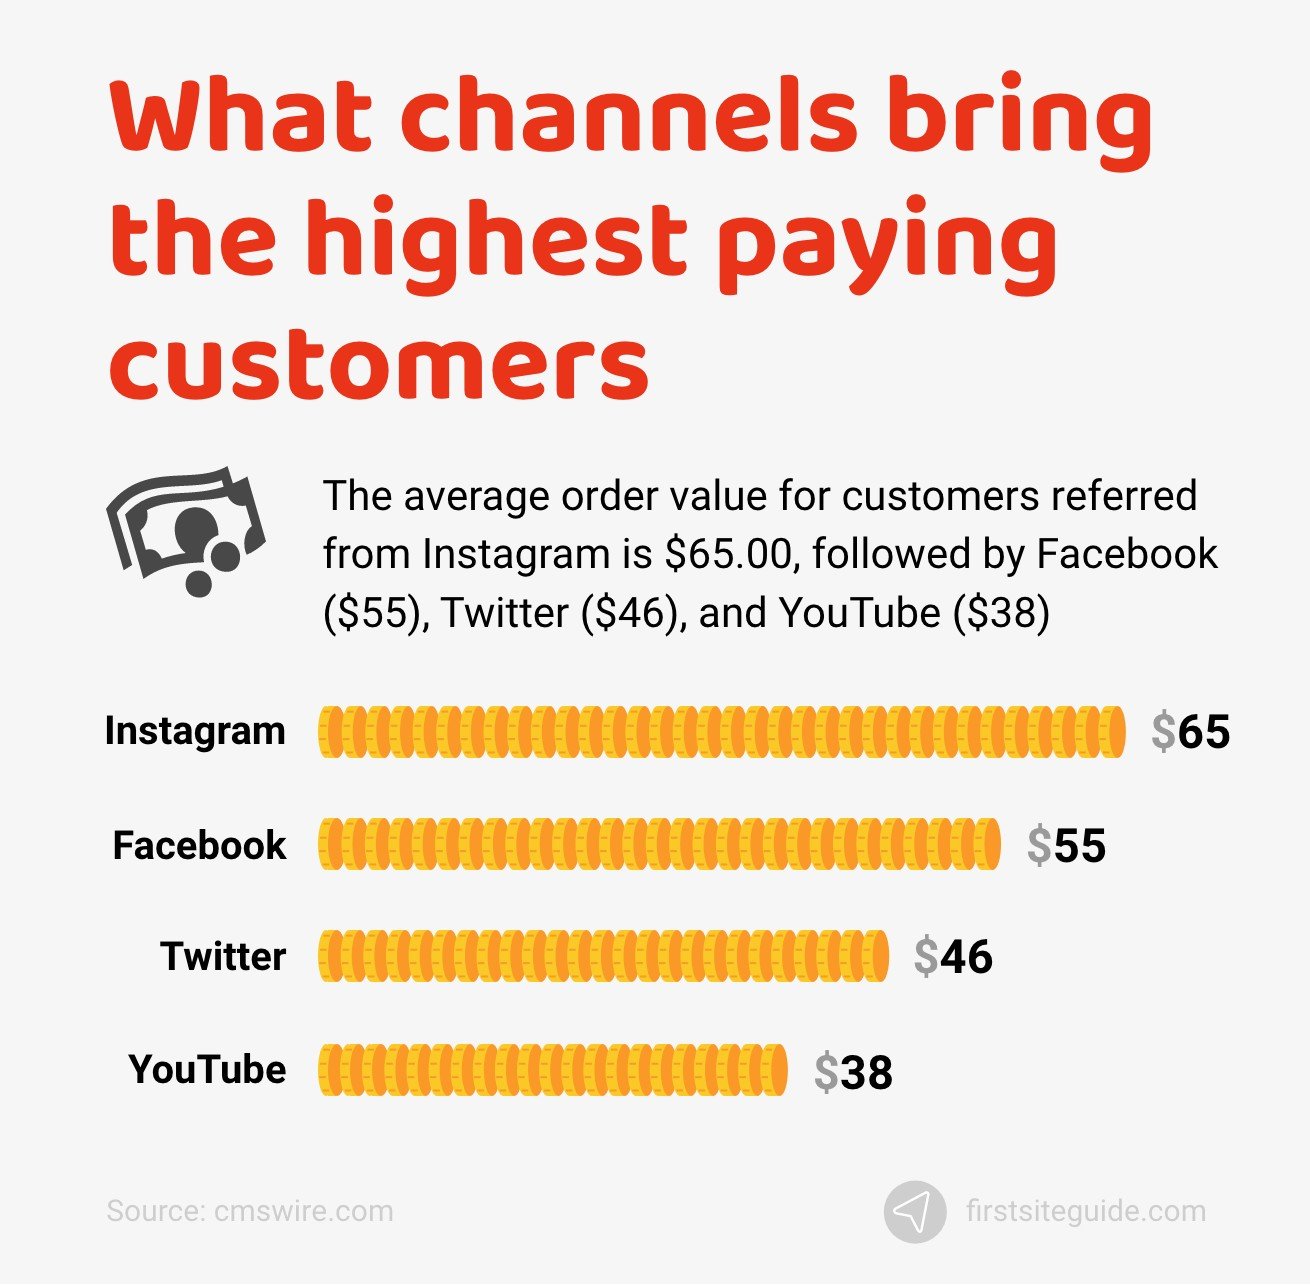 What channels bring the highest paying customers